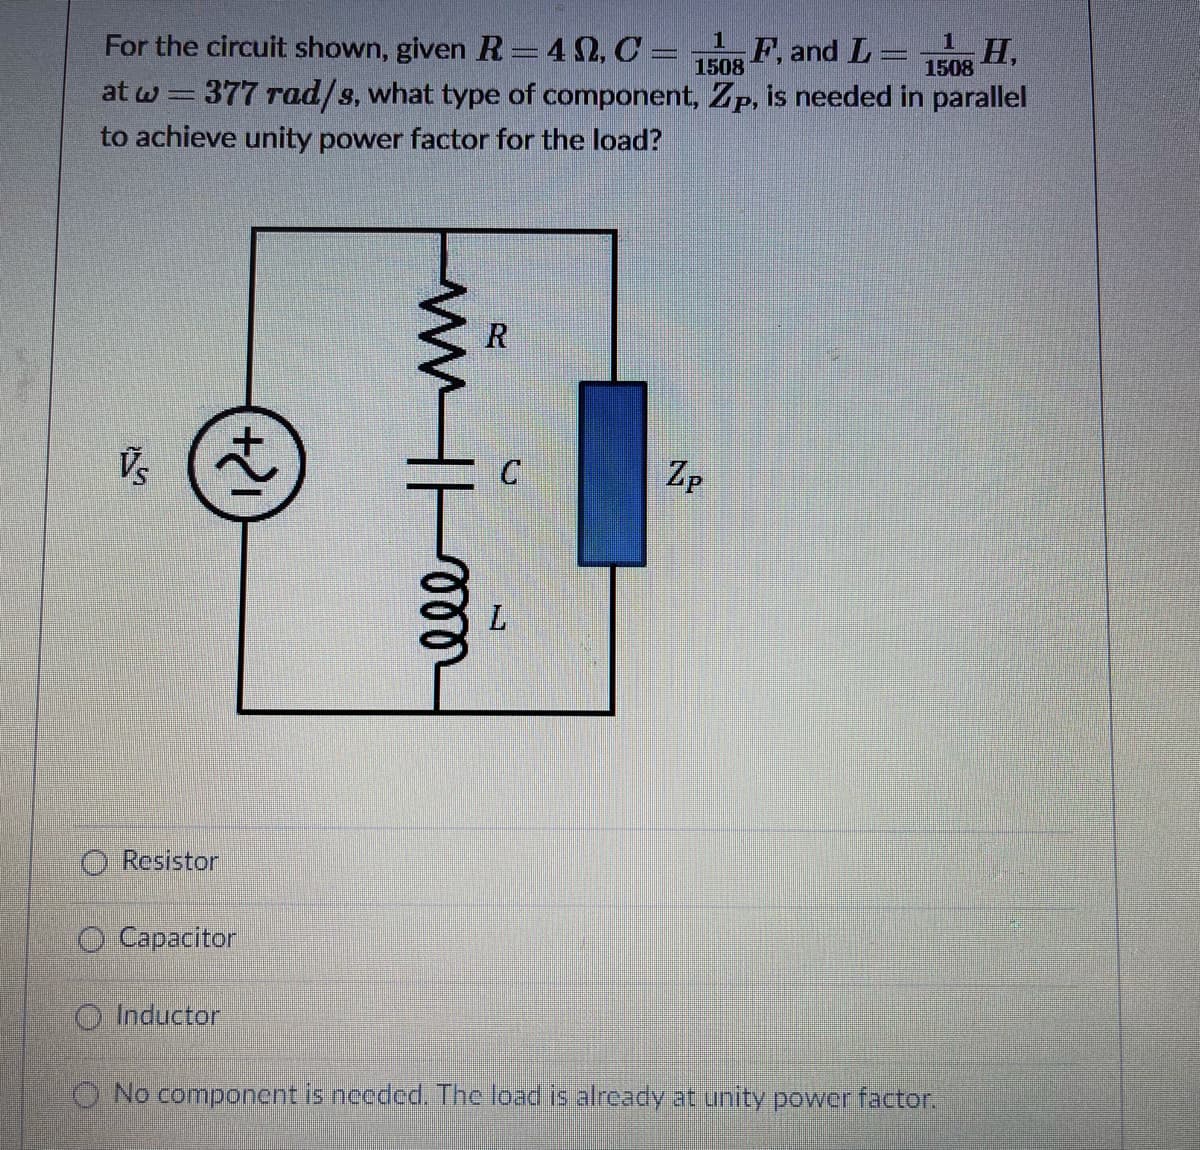 For the circuit shown, given R=42, C =
F, and L=
1508
H,
1508
at w= 377 rad/s, what type of component, Zp, is needed in parallel
to achieve unity power factor for the load?
R
Vs
Zp
O Resistor
O Capacitor
O Inductor
O No component is needed. The load is already at unity power factor.
